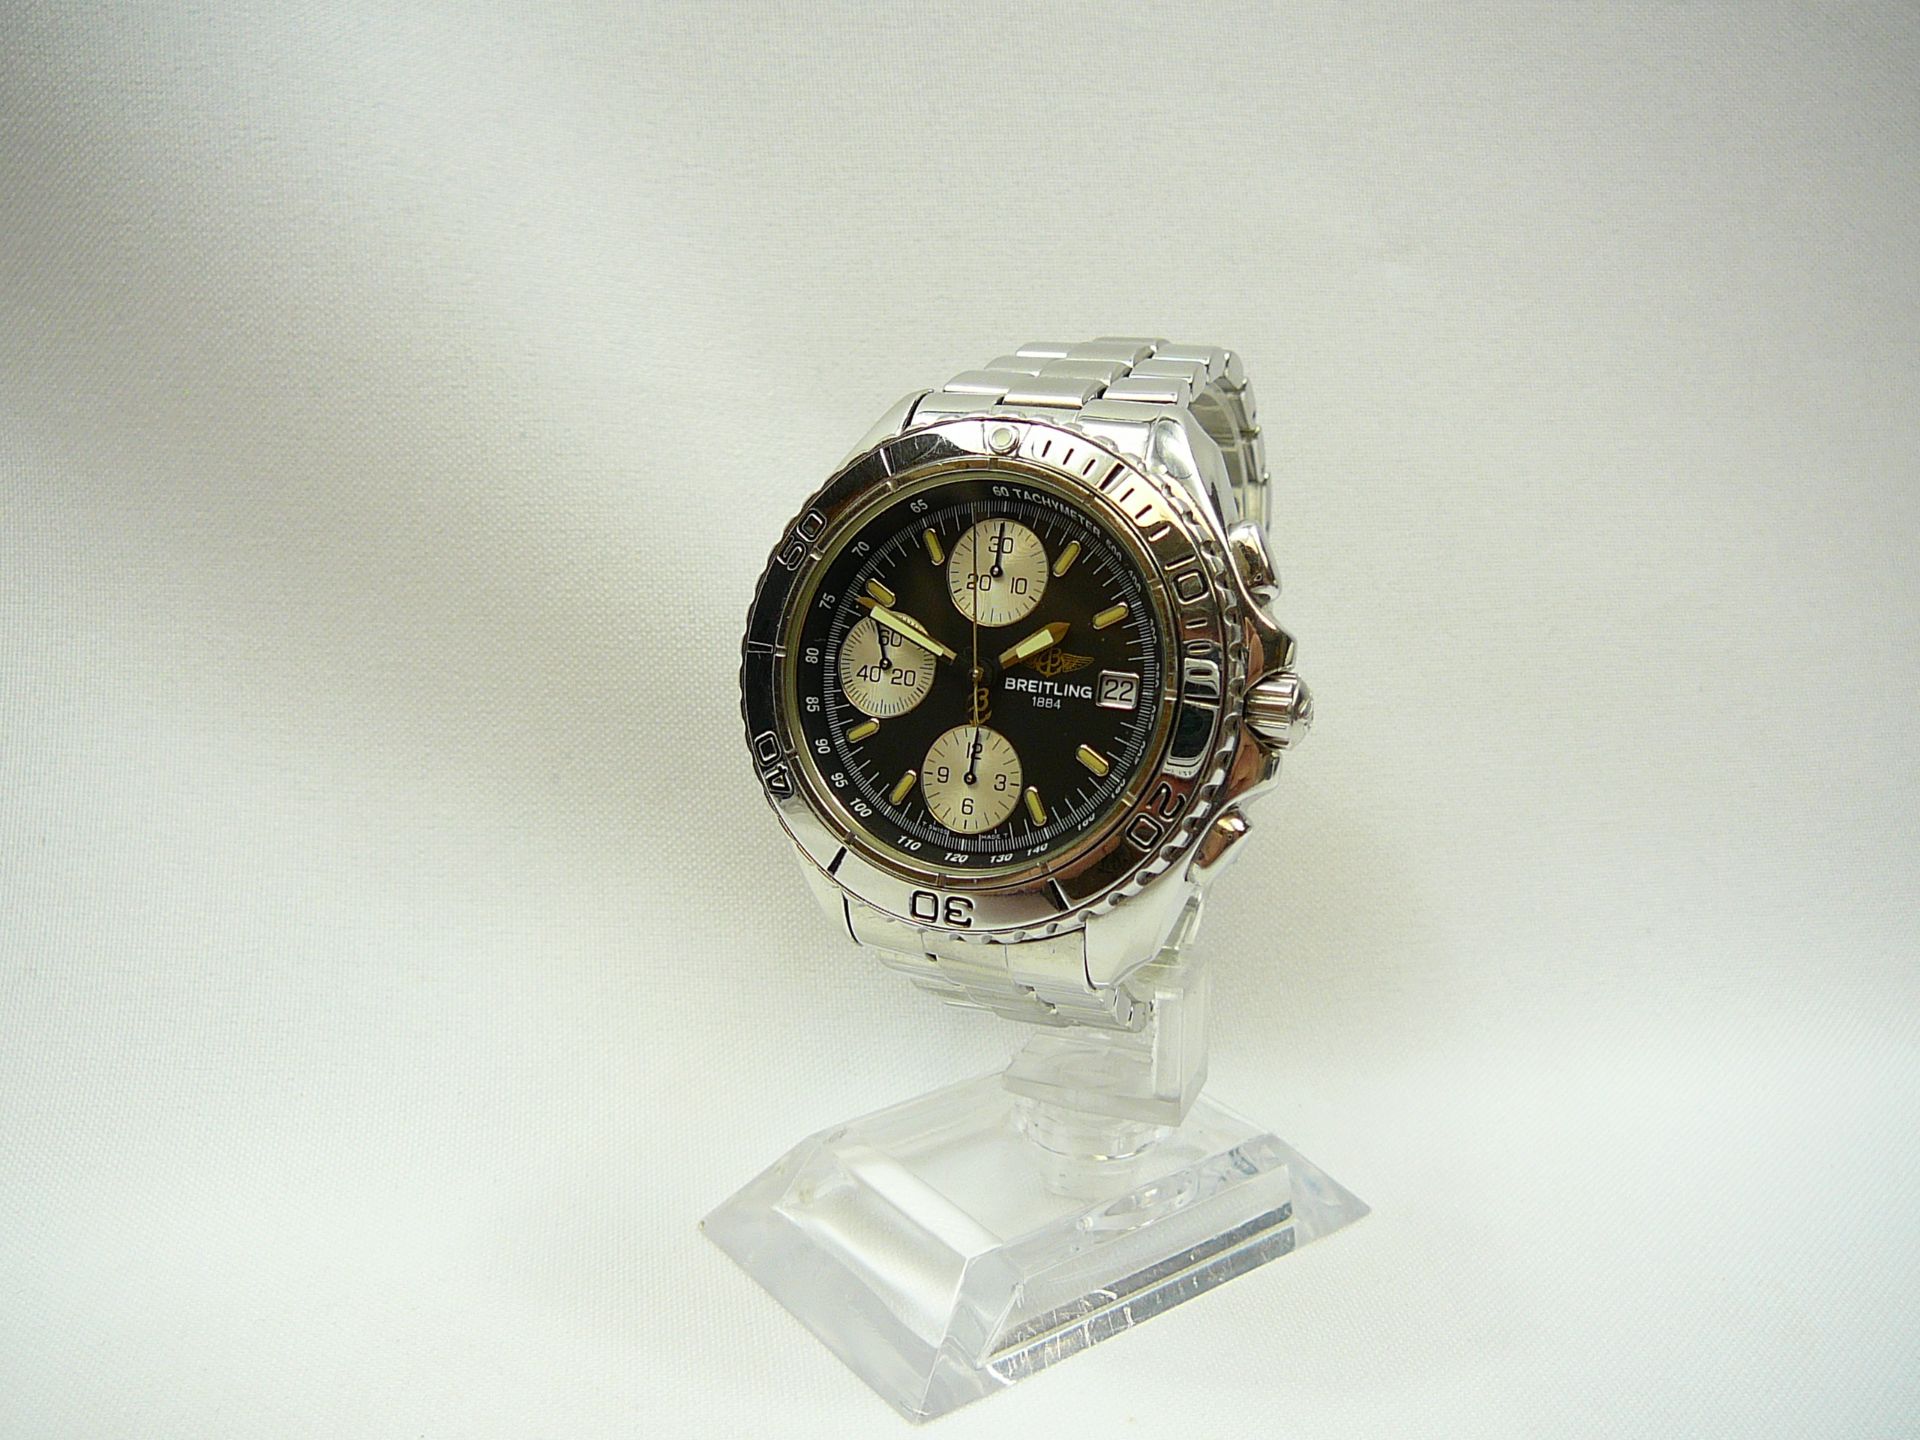 Gents Breitling Wristwatch - Image 2 of 4